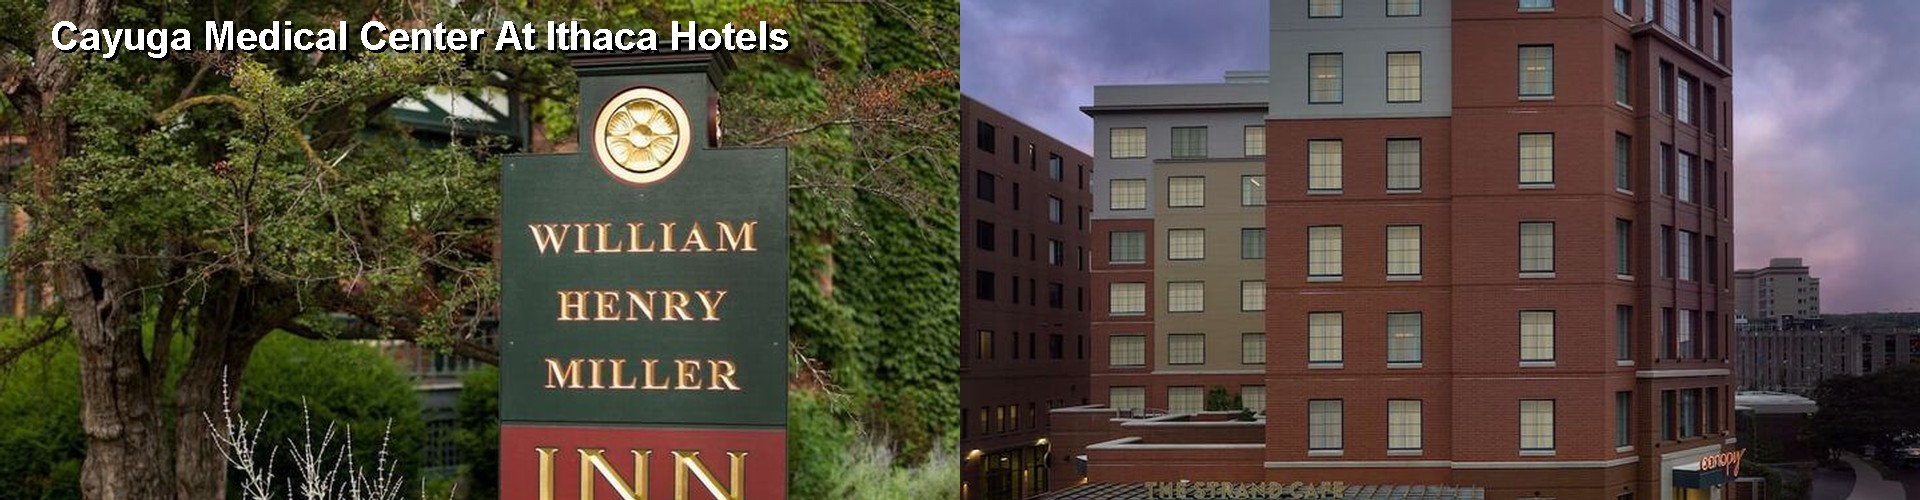 2 Best Hotels near Cayuga Medical Center At Ithaca